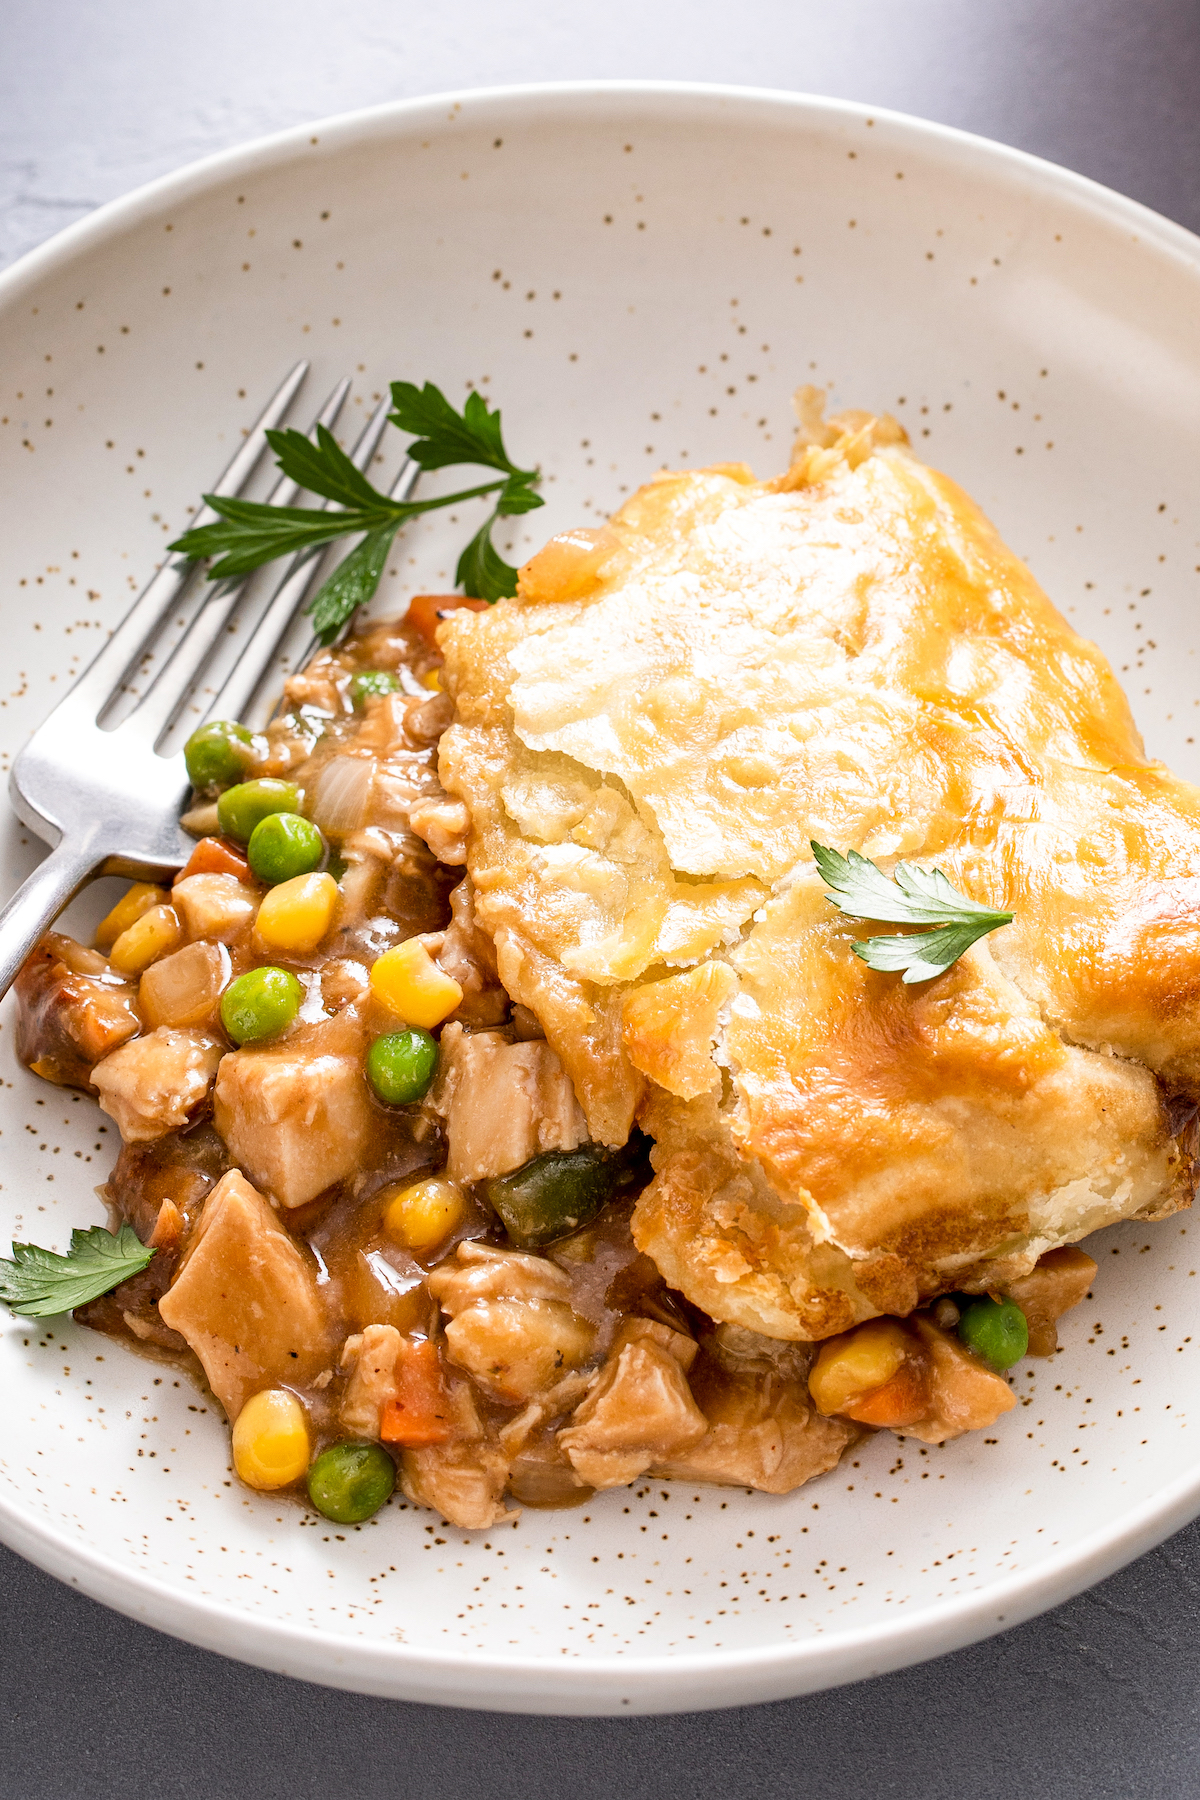 Turkey pot pie with puff pastry on a plate with a fork.